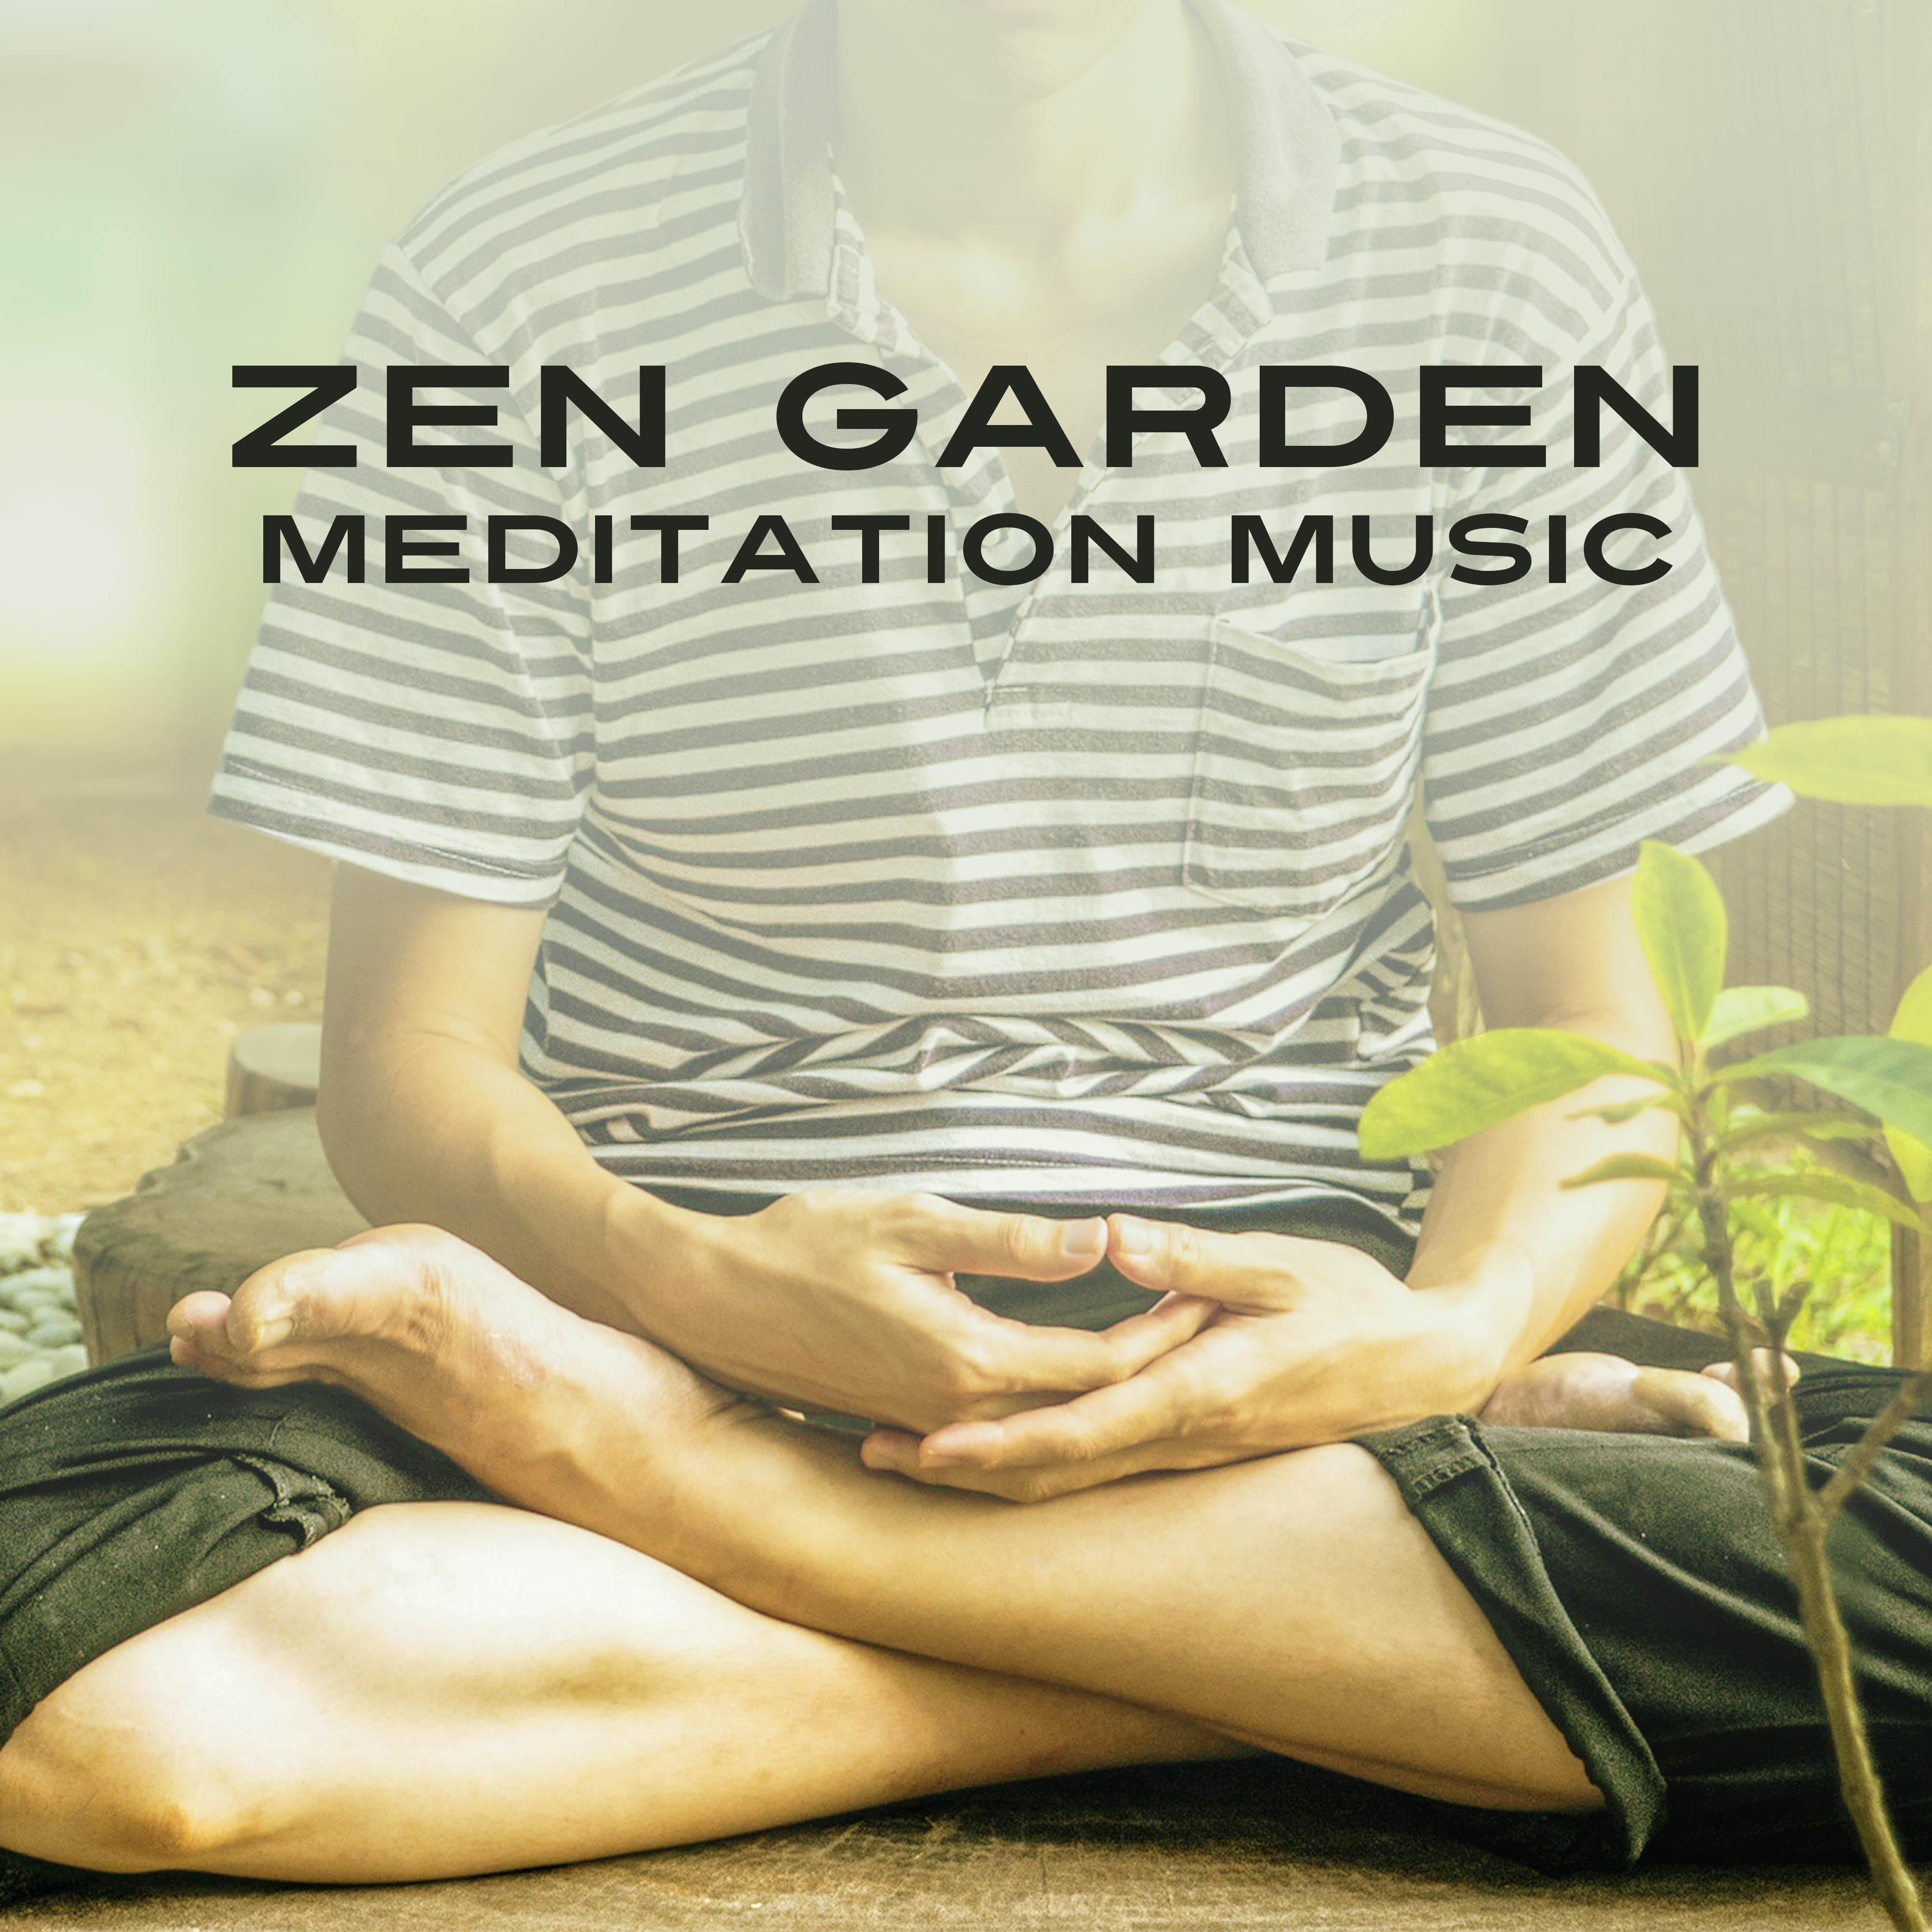 Zen Garden Meditation Music – New Age Songs for Meditate, Healing Relaxation Music, Yoga on the Morning